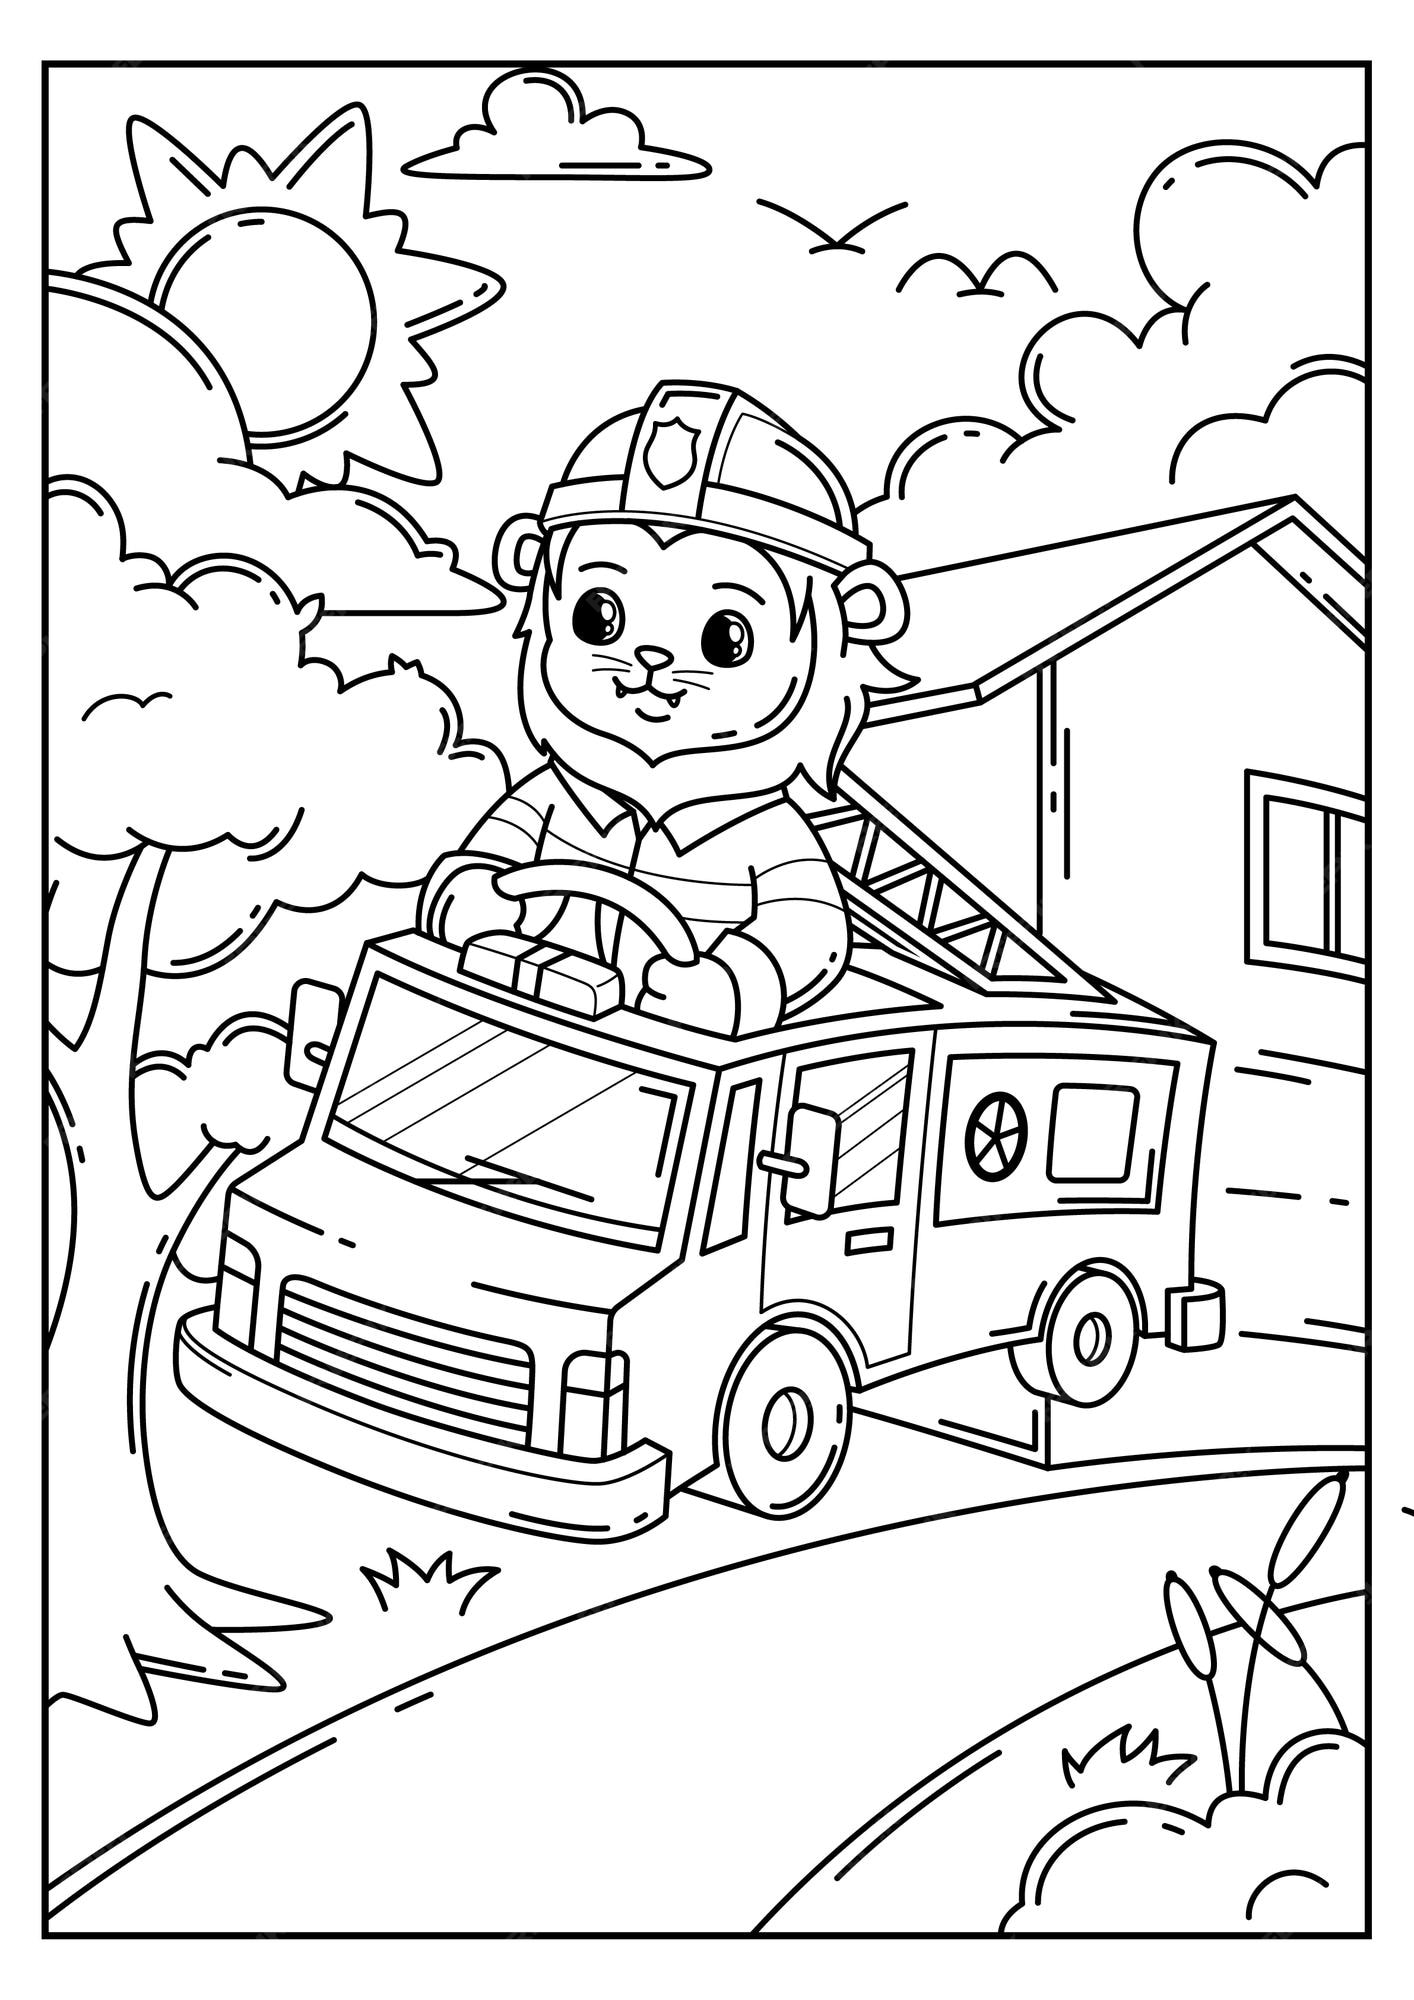 Premium vector handdrawn doodle coloring book cute lion being a firefighter driving a fire truck